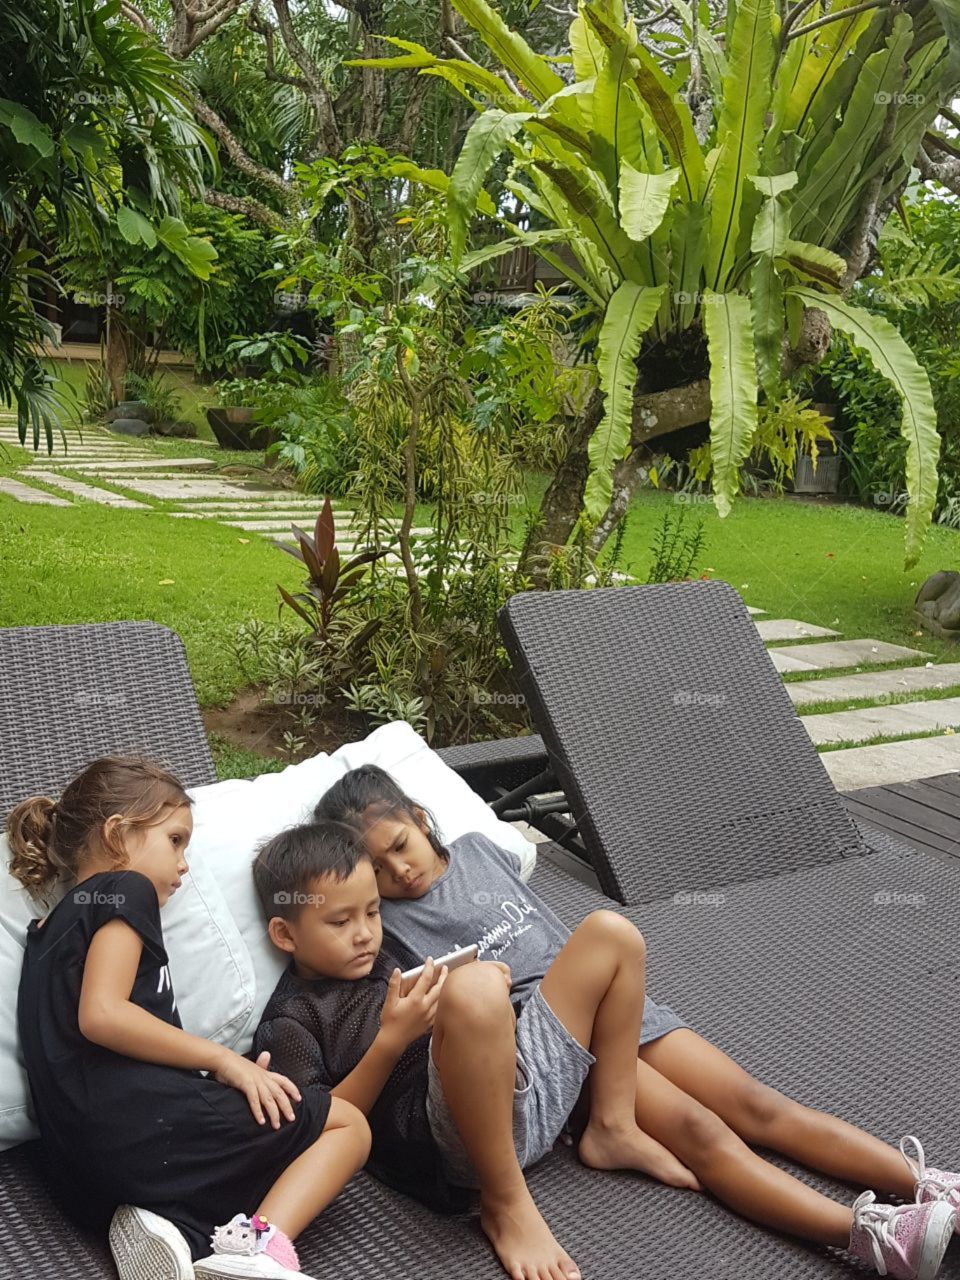 This is beautiful yet sad at the same time. This, represents how technology has changed the world. Three kids out in the big beautiful garden, during summer, yet completely unaware of their beautiful surroundings.